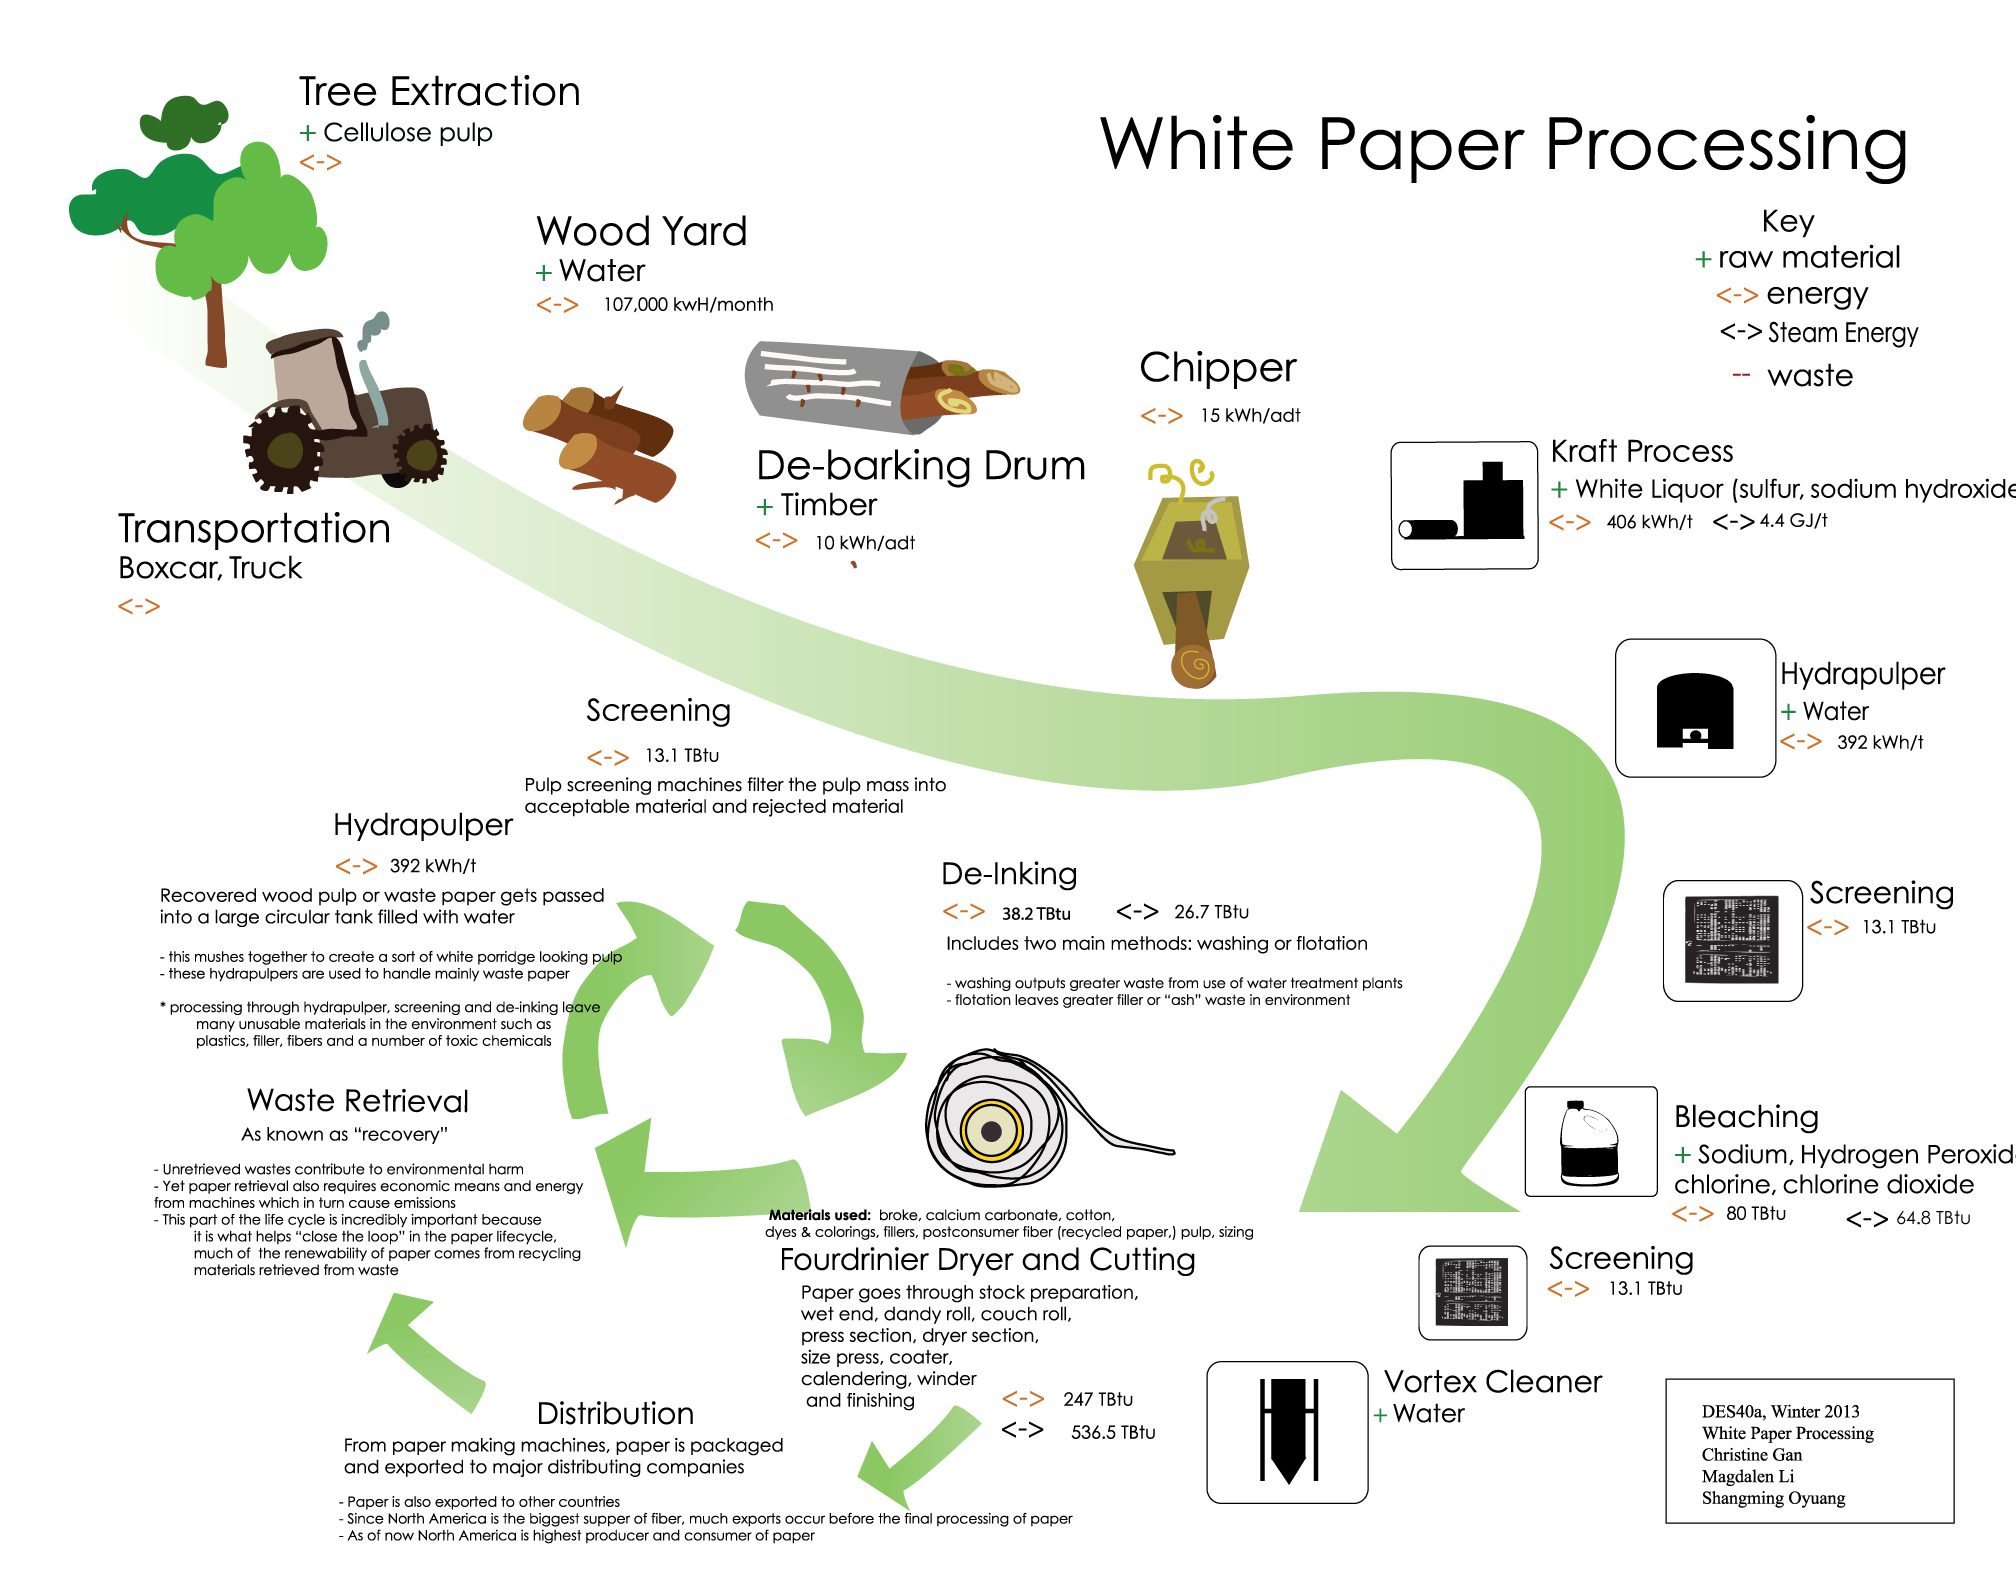 The paper making process